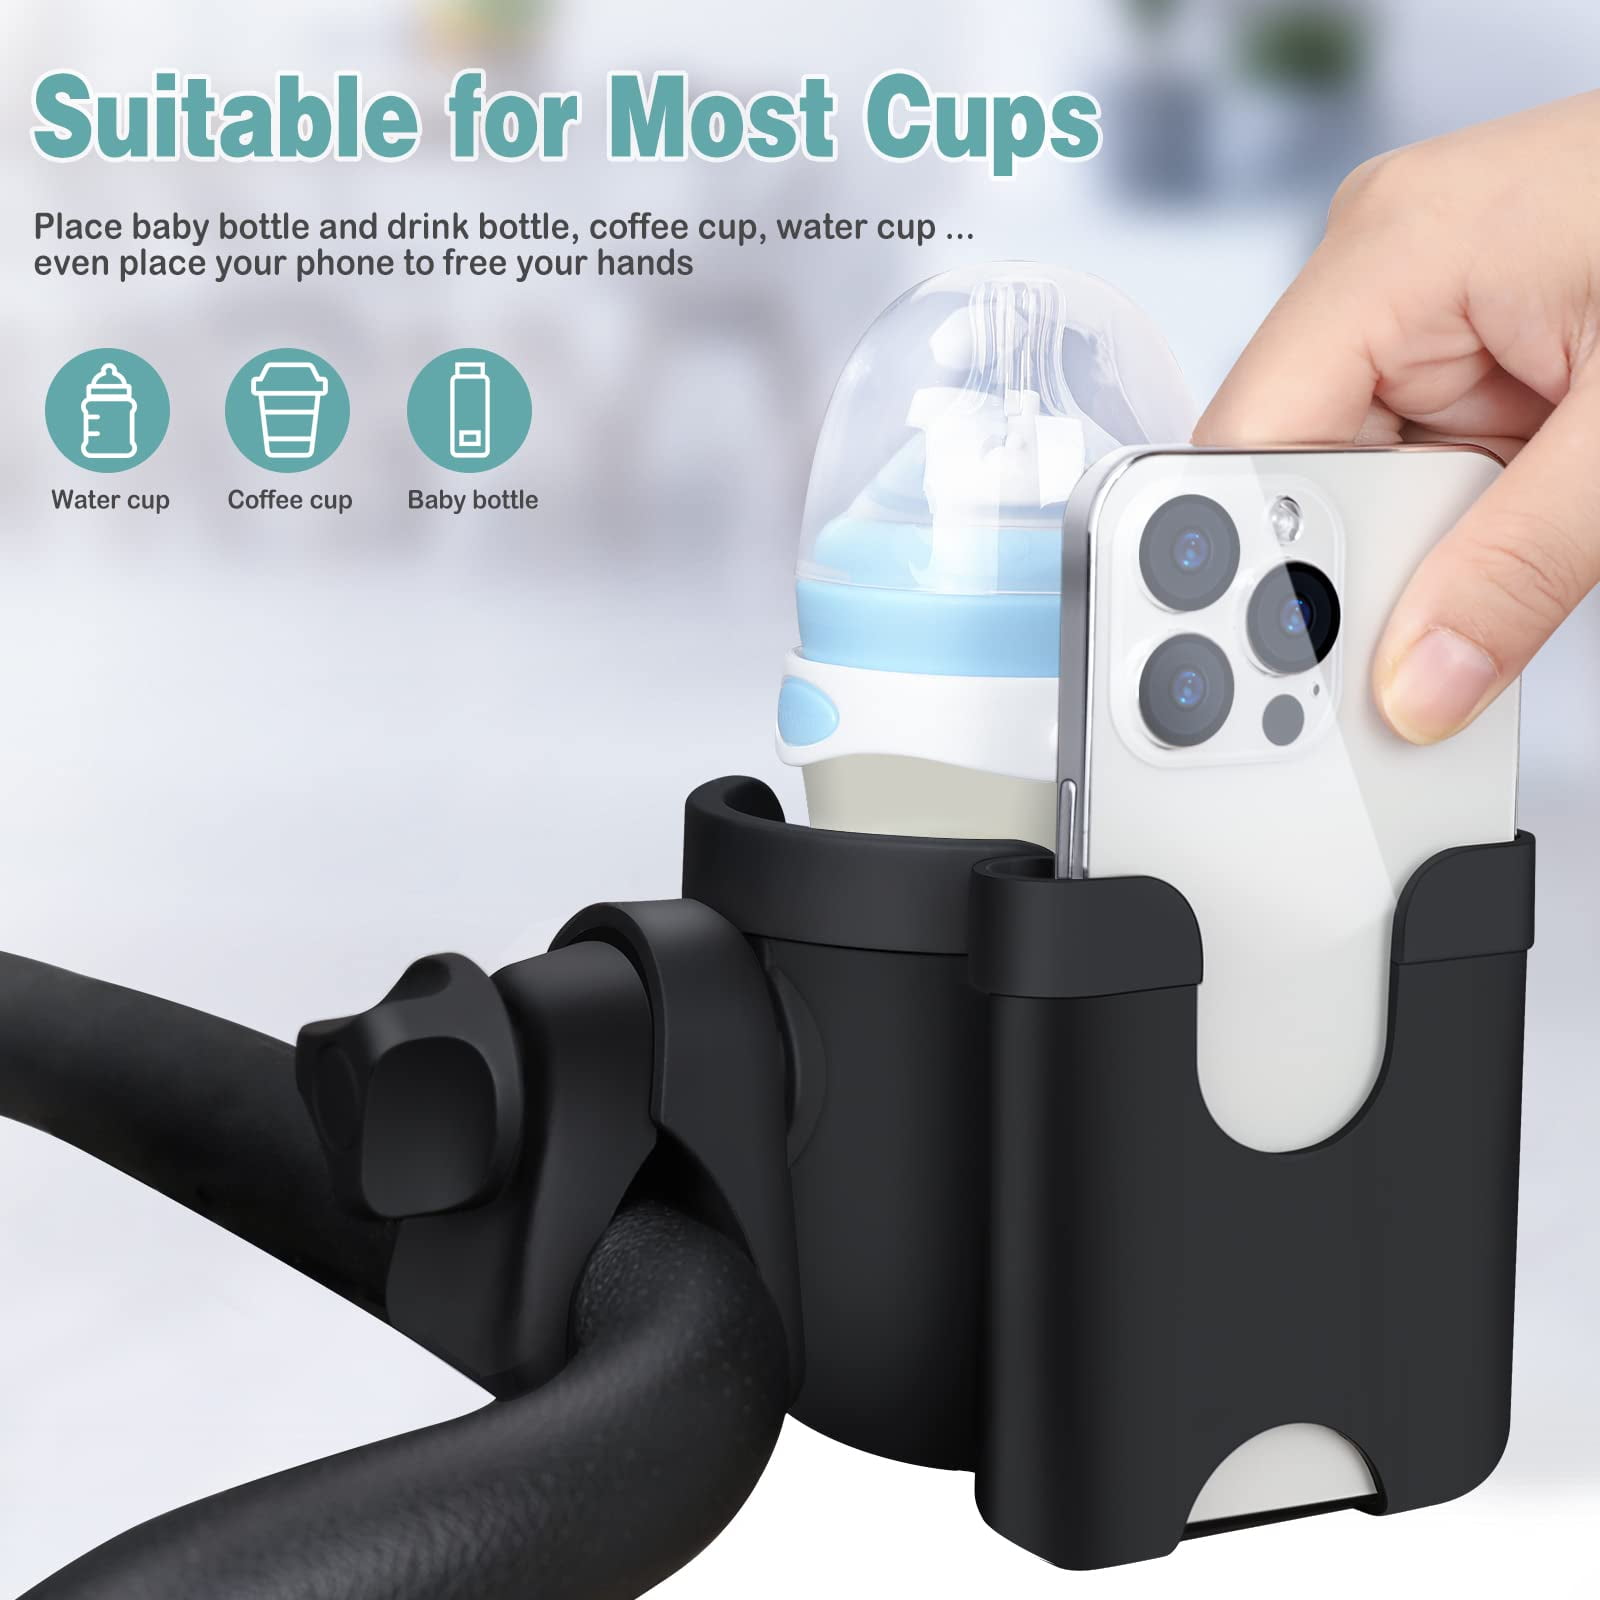 Universal Stroller cup Holder 2 In 1 Twin pram water milk bottle rack  Drinks Stand Carrying Case for Bikes Trolleys Pushchairs